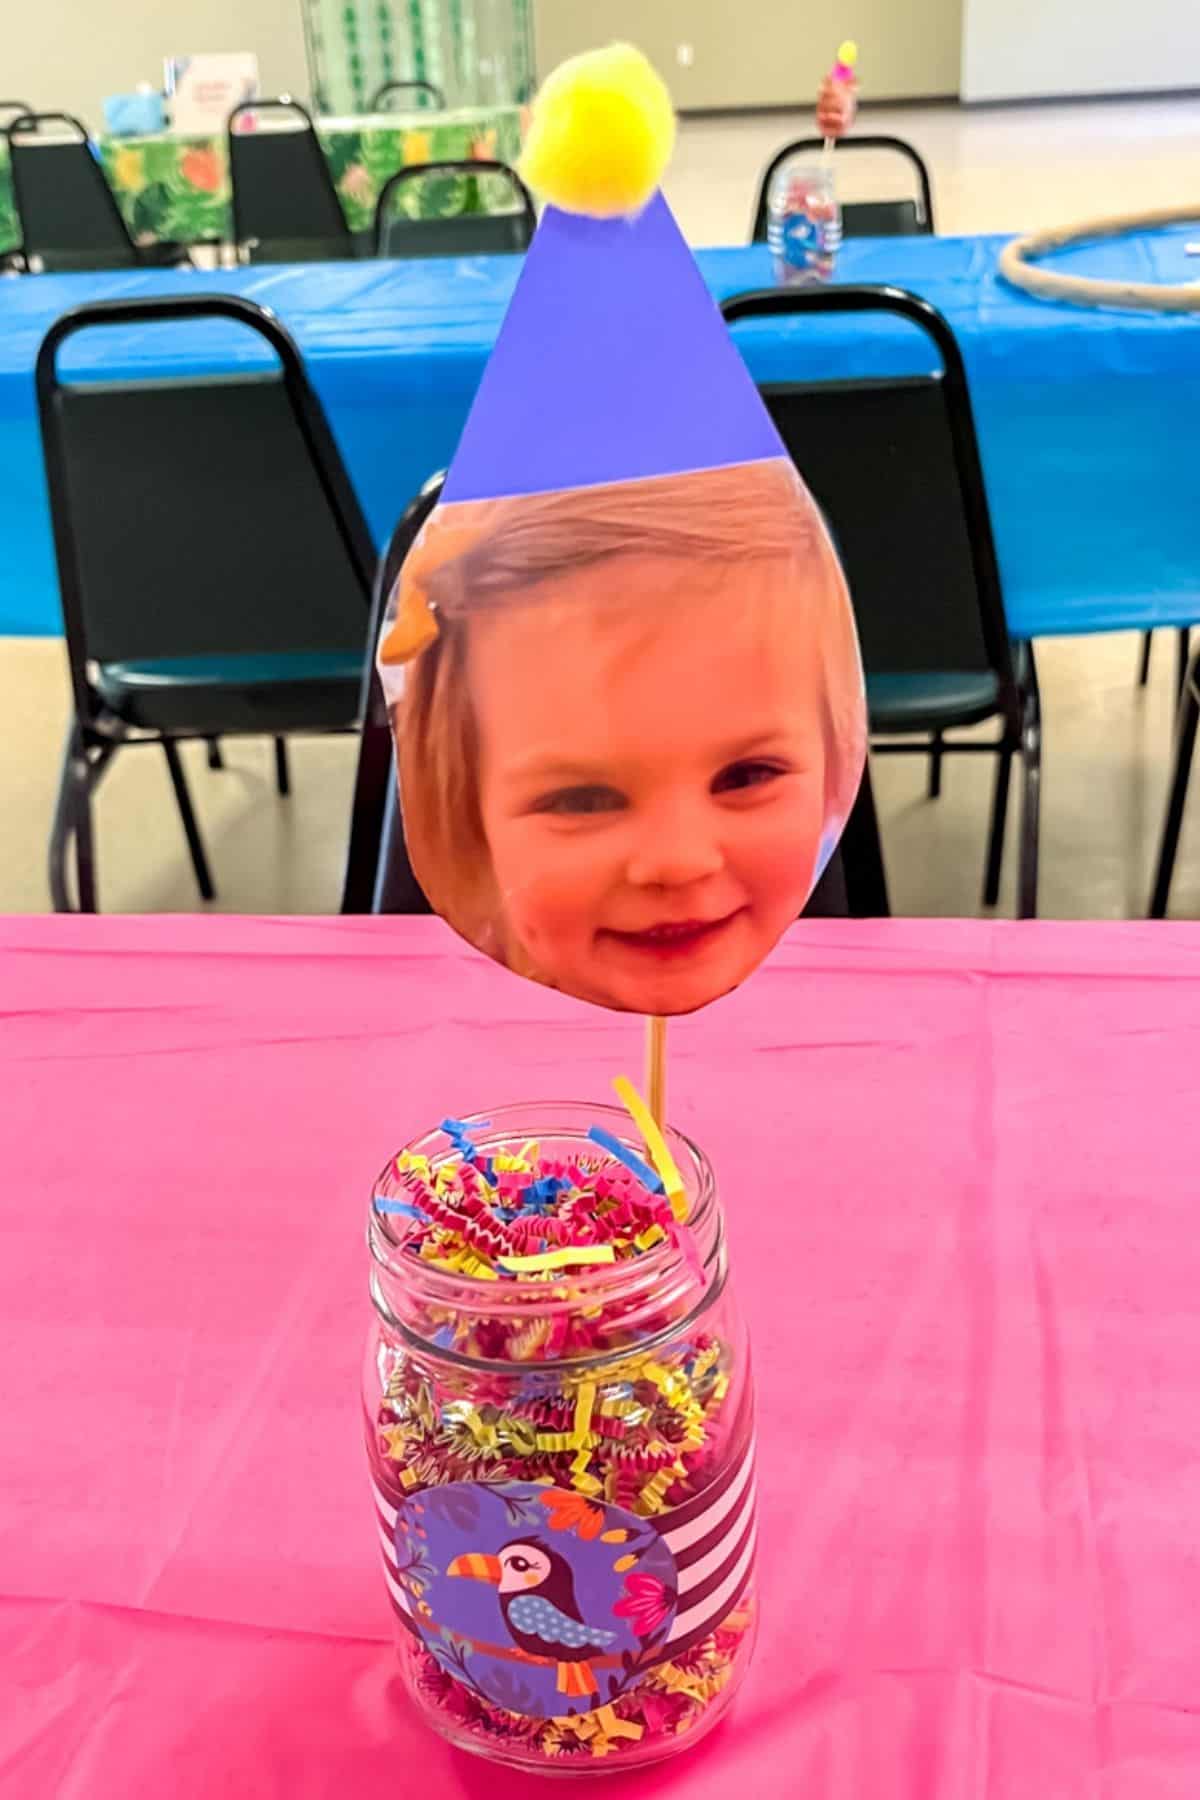 Birthday party centerpieces with the birthday kids face.